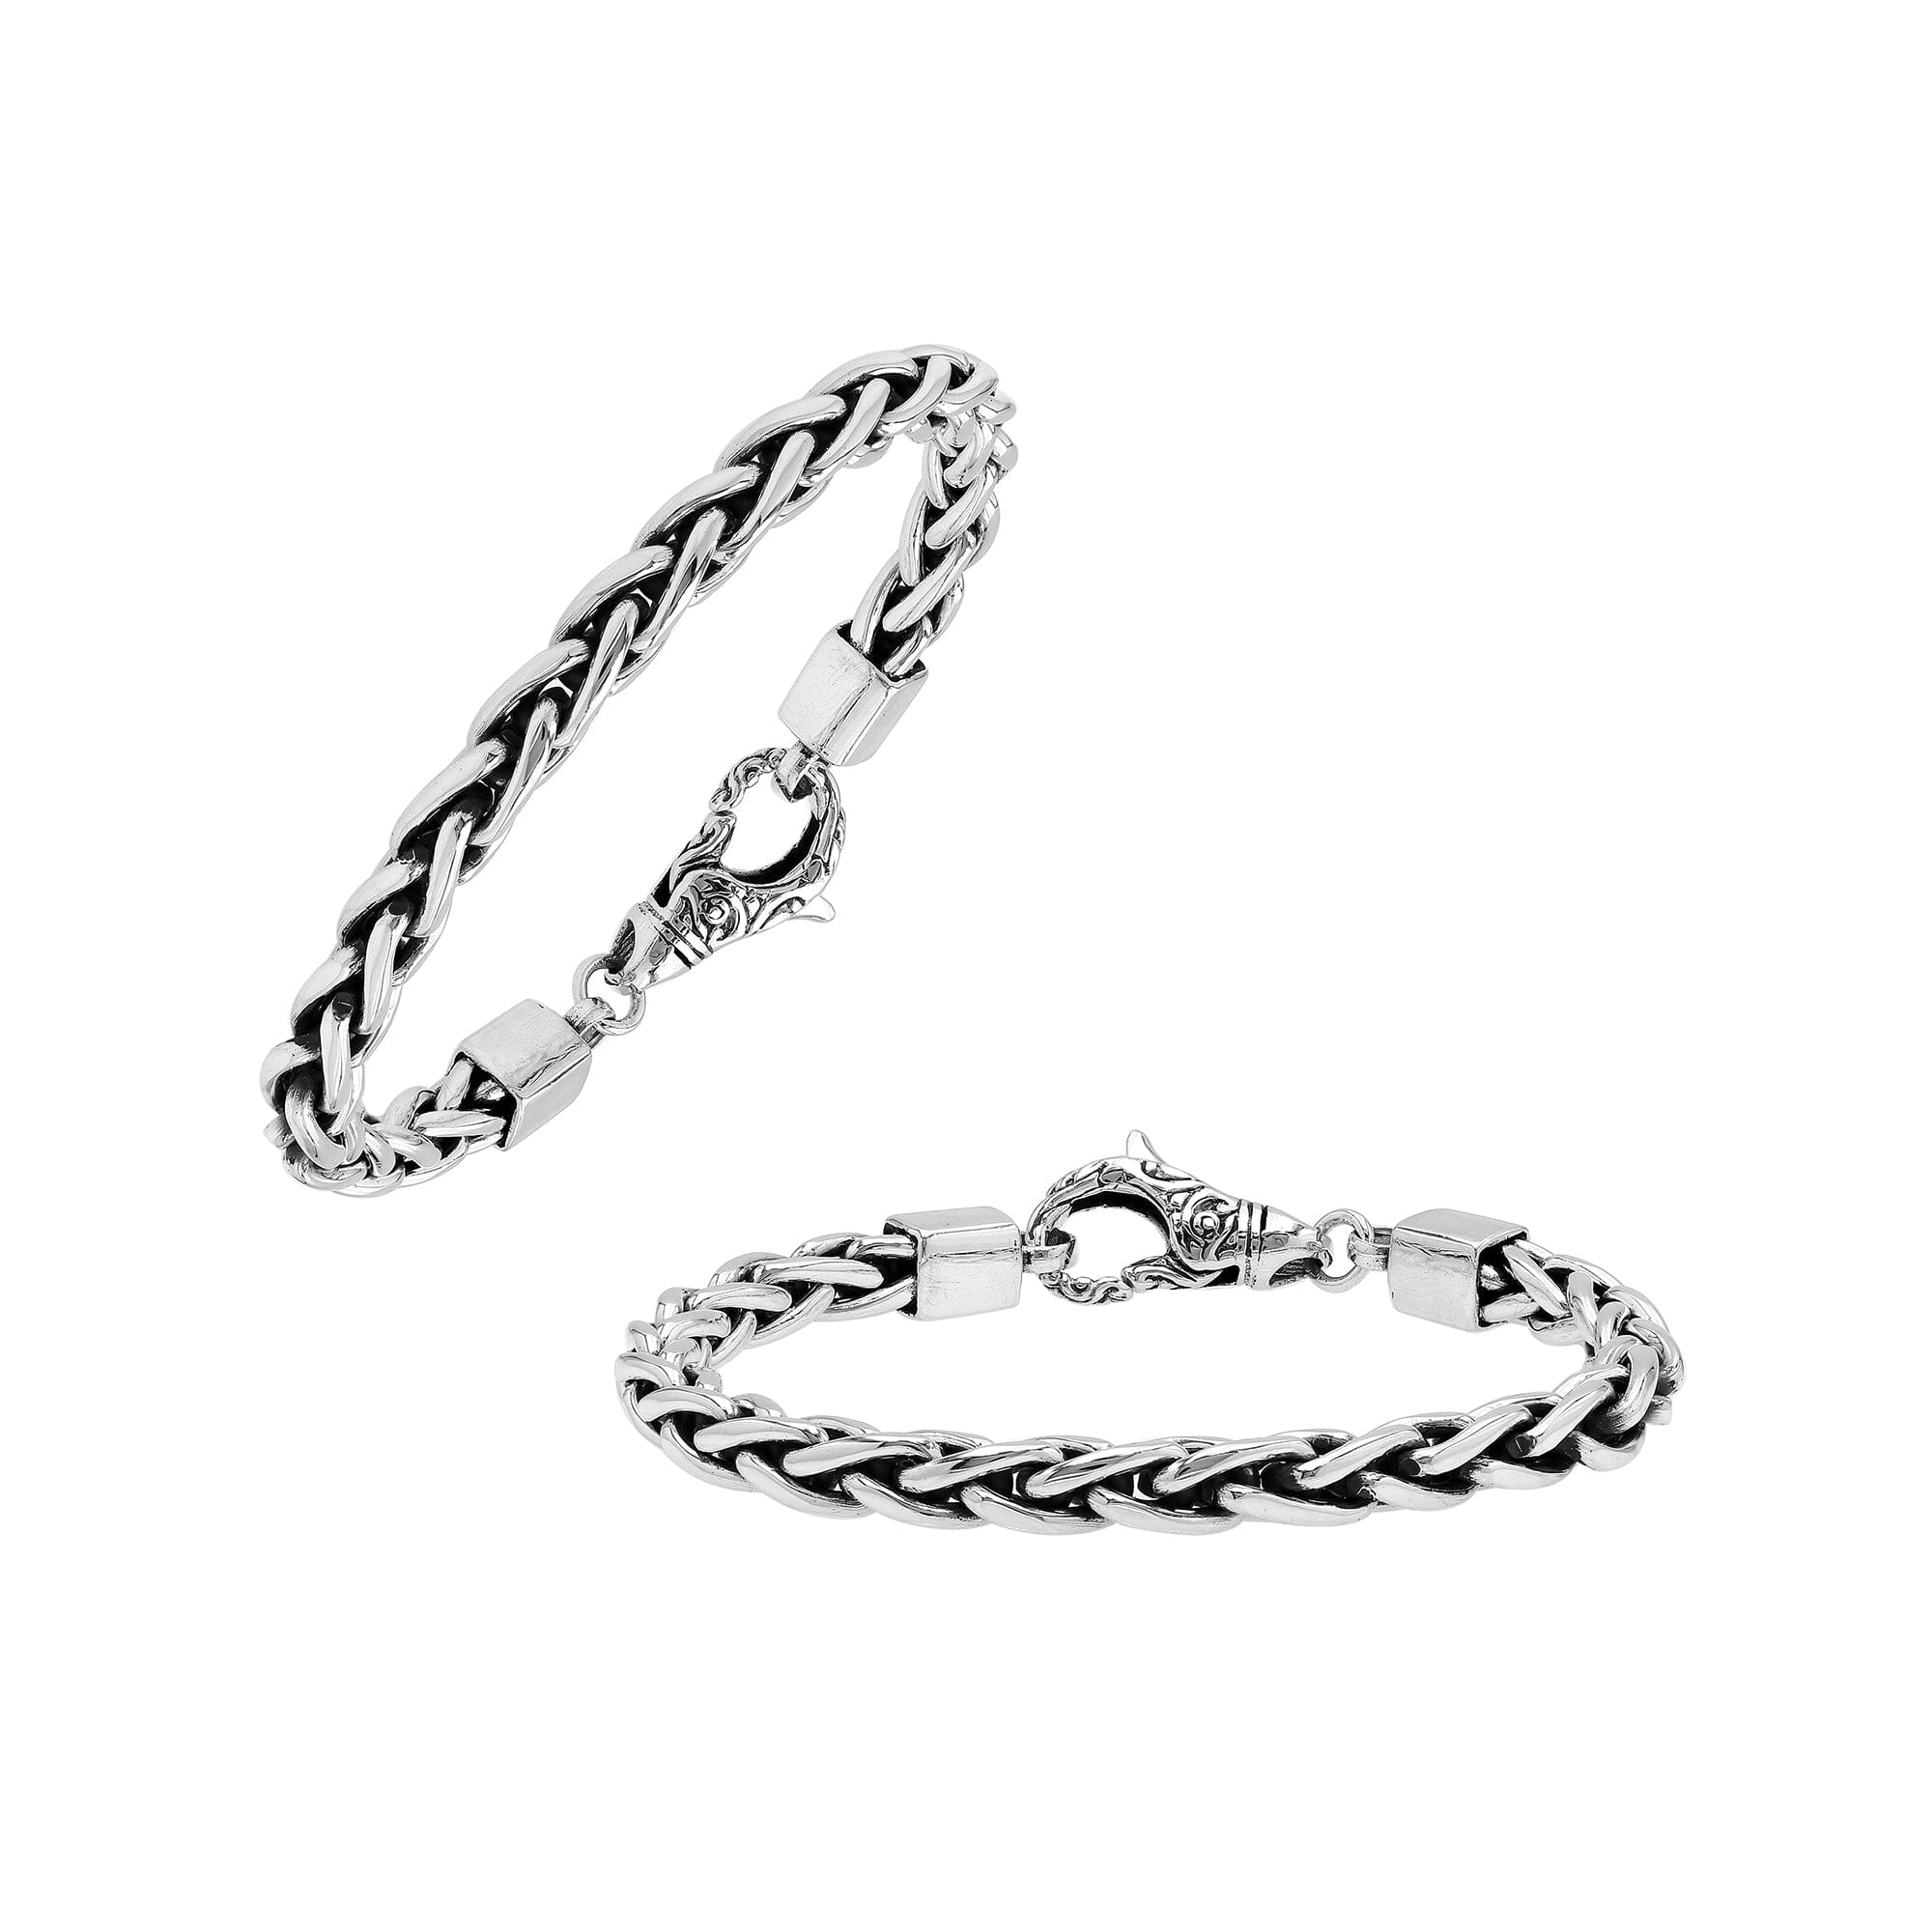 AB-6333-S-5MM-8" Bali Hand Crafted Sterling Silver Bracelet